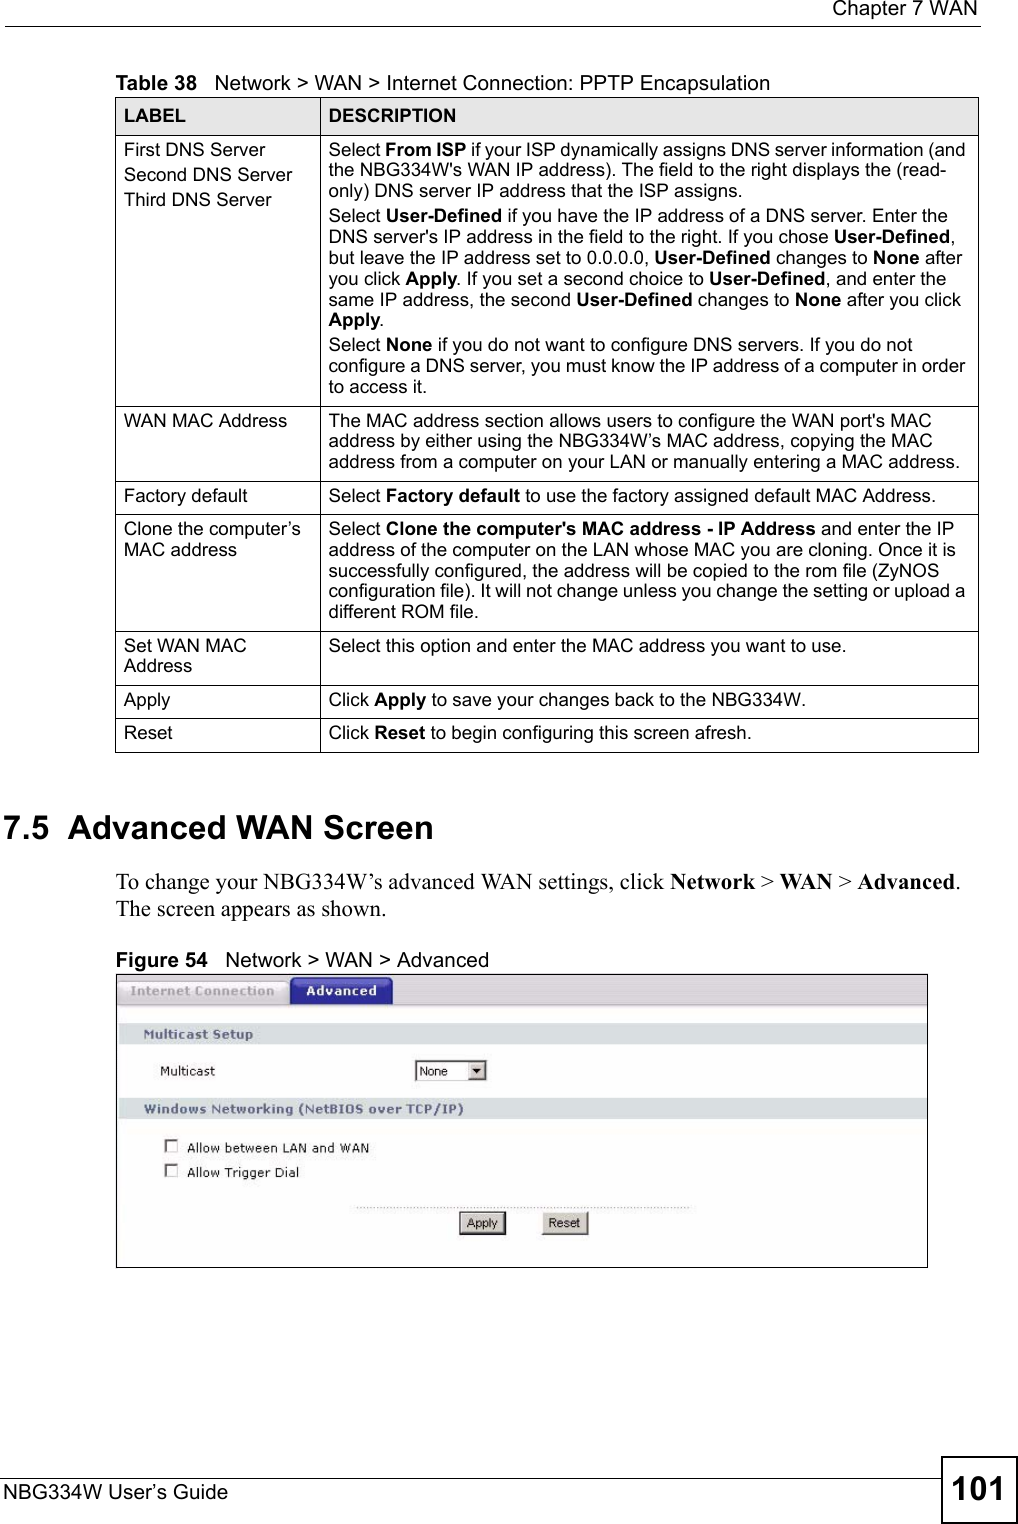  Chapter 7 WANNBG334W User’s Guide 1017.5  Advanced WAN ScreenTo change your NBG334W’s advanced WAN settings, click Network &gt; WAN &gt; Advanced. The screen appears as shown.Figure 54   Network &gt; WAN &gt; Advanced First DNS ServerSecond DNS ServerThird DNS Server Select From ISP if your ISP dynamically assigns DNS server information (and the NBG334W&apos;s WAN IP address). The field to the right displays the (read-only) DNS server IP address that the ISP assigns. Select User-Defined if you have the IP address of a DNS server. Enter the DNS server&apos;s IP address in the field to the right. If you chose User-Defined, but leave the IP address set to 0.0.0.0, User-Defined changes to None after you click Apply. If you set a second choice to User-Defined, and enter the same IP address, the second User-Defined changes to None after you click Apply. Select None if you do not want to configure DNS servers. If you do not configure a DNS server, you must know the IP address of a computer in order to access it.WAN MAC Address The MAC address section allows users to configure the WAN port&apos;s MAC address by either using the NBG334W’s MAC address, copying the MAC address from a computer on your LAN or manually entering a MAC address. Factory default Select Factory default to use the factory assigned default MAC Address.Clone the computer’s MAC addressSelect Clone the computer&apos;s MAC address - IP Address and enter the IP address of the computer on the LAN whose MAC you are cloning. Once it is successfully configured, the address will be copied to the rom file (ZyNOS configuration file). It will not change unless you change the setting or upload a different ROM file. Set WAN MAC AddressSelect this option and enter the MAC address you want to use.Apply Click Apply to save your changes back to the NBG334W.Reset Click Reset to begin configuring this screen afresh.Table 38   Network &gt; WAN &gt; Internet Connection: PPTP EncapsulationLABEL DESCRIPTION